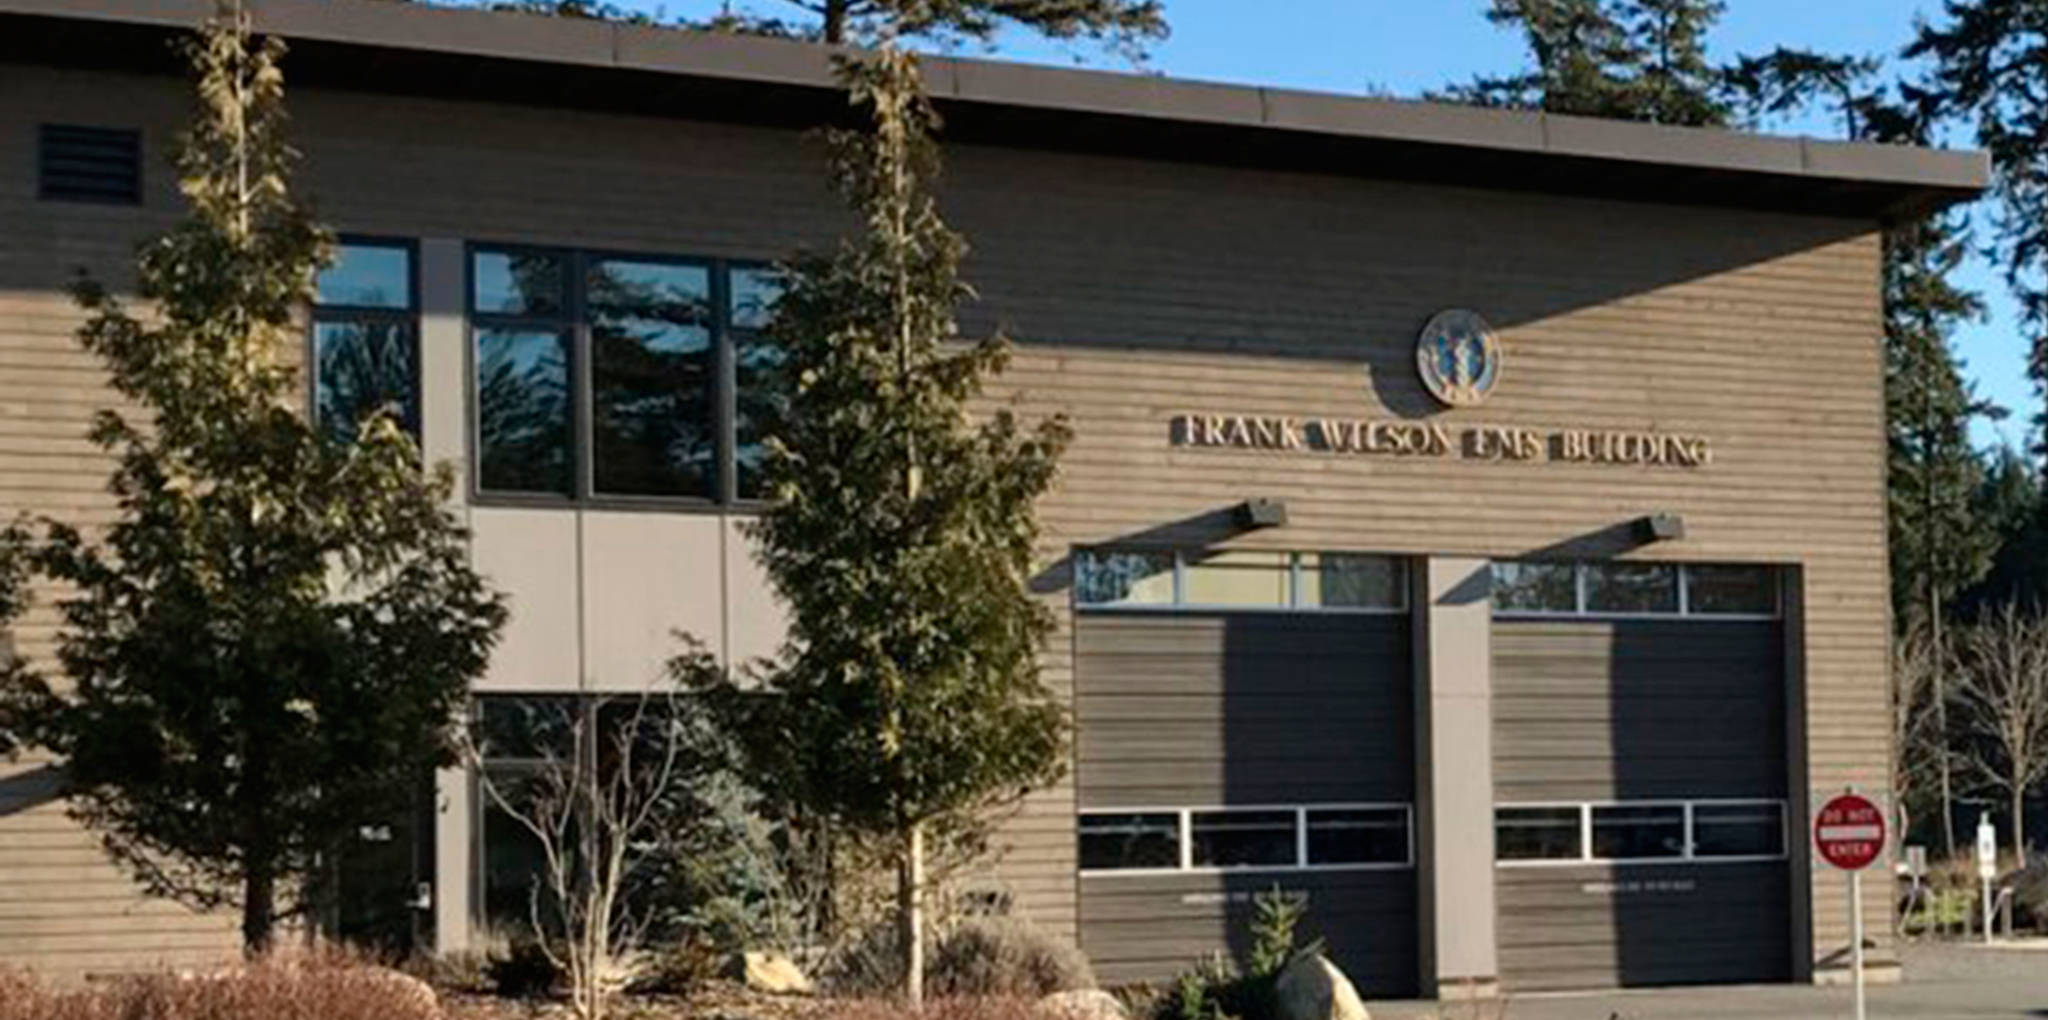 San Juan Island EMS chief reports alleged illegal recording to county sheriff’s office | Update